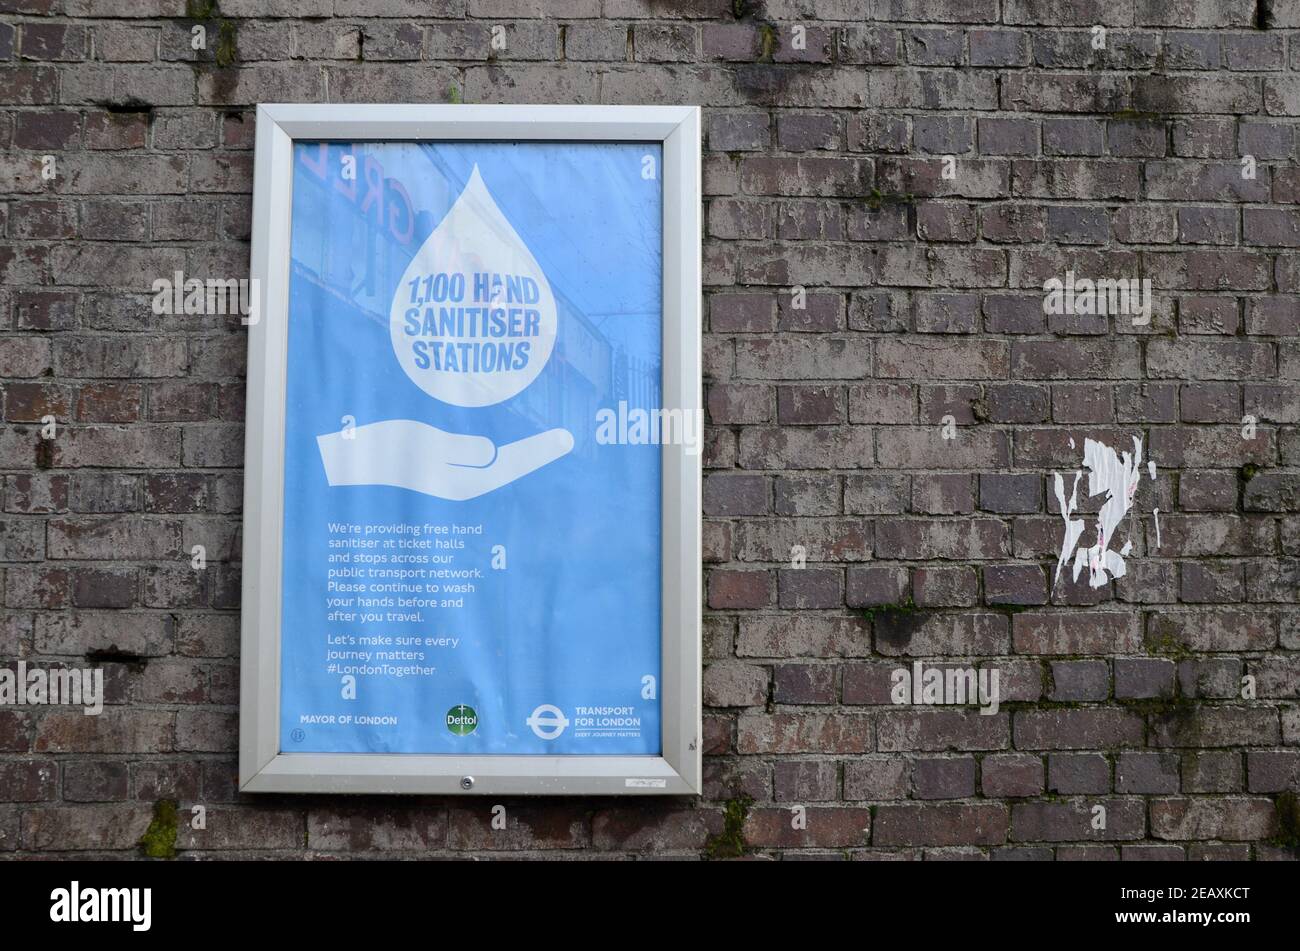 a poster for 1100 hand sanitiser stations at harringay overground station london england uk Stock Photo